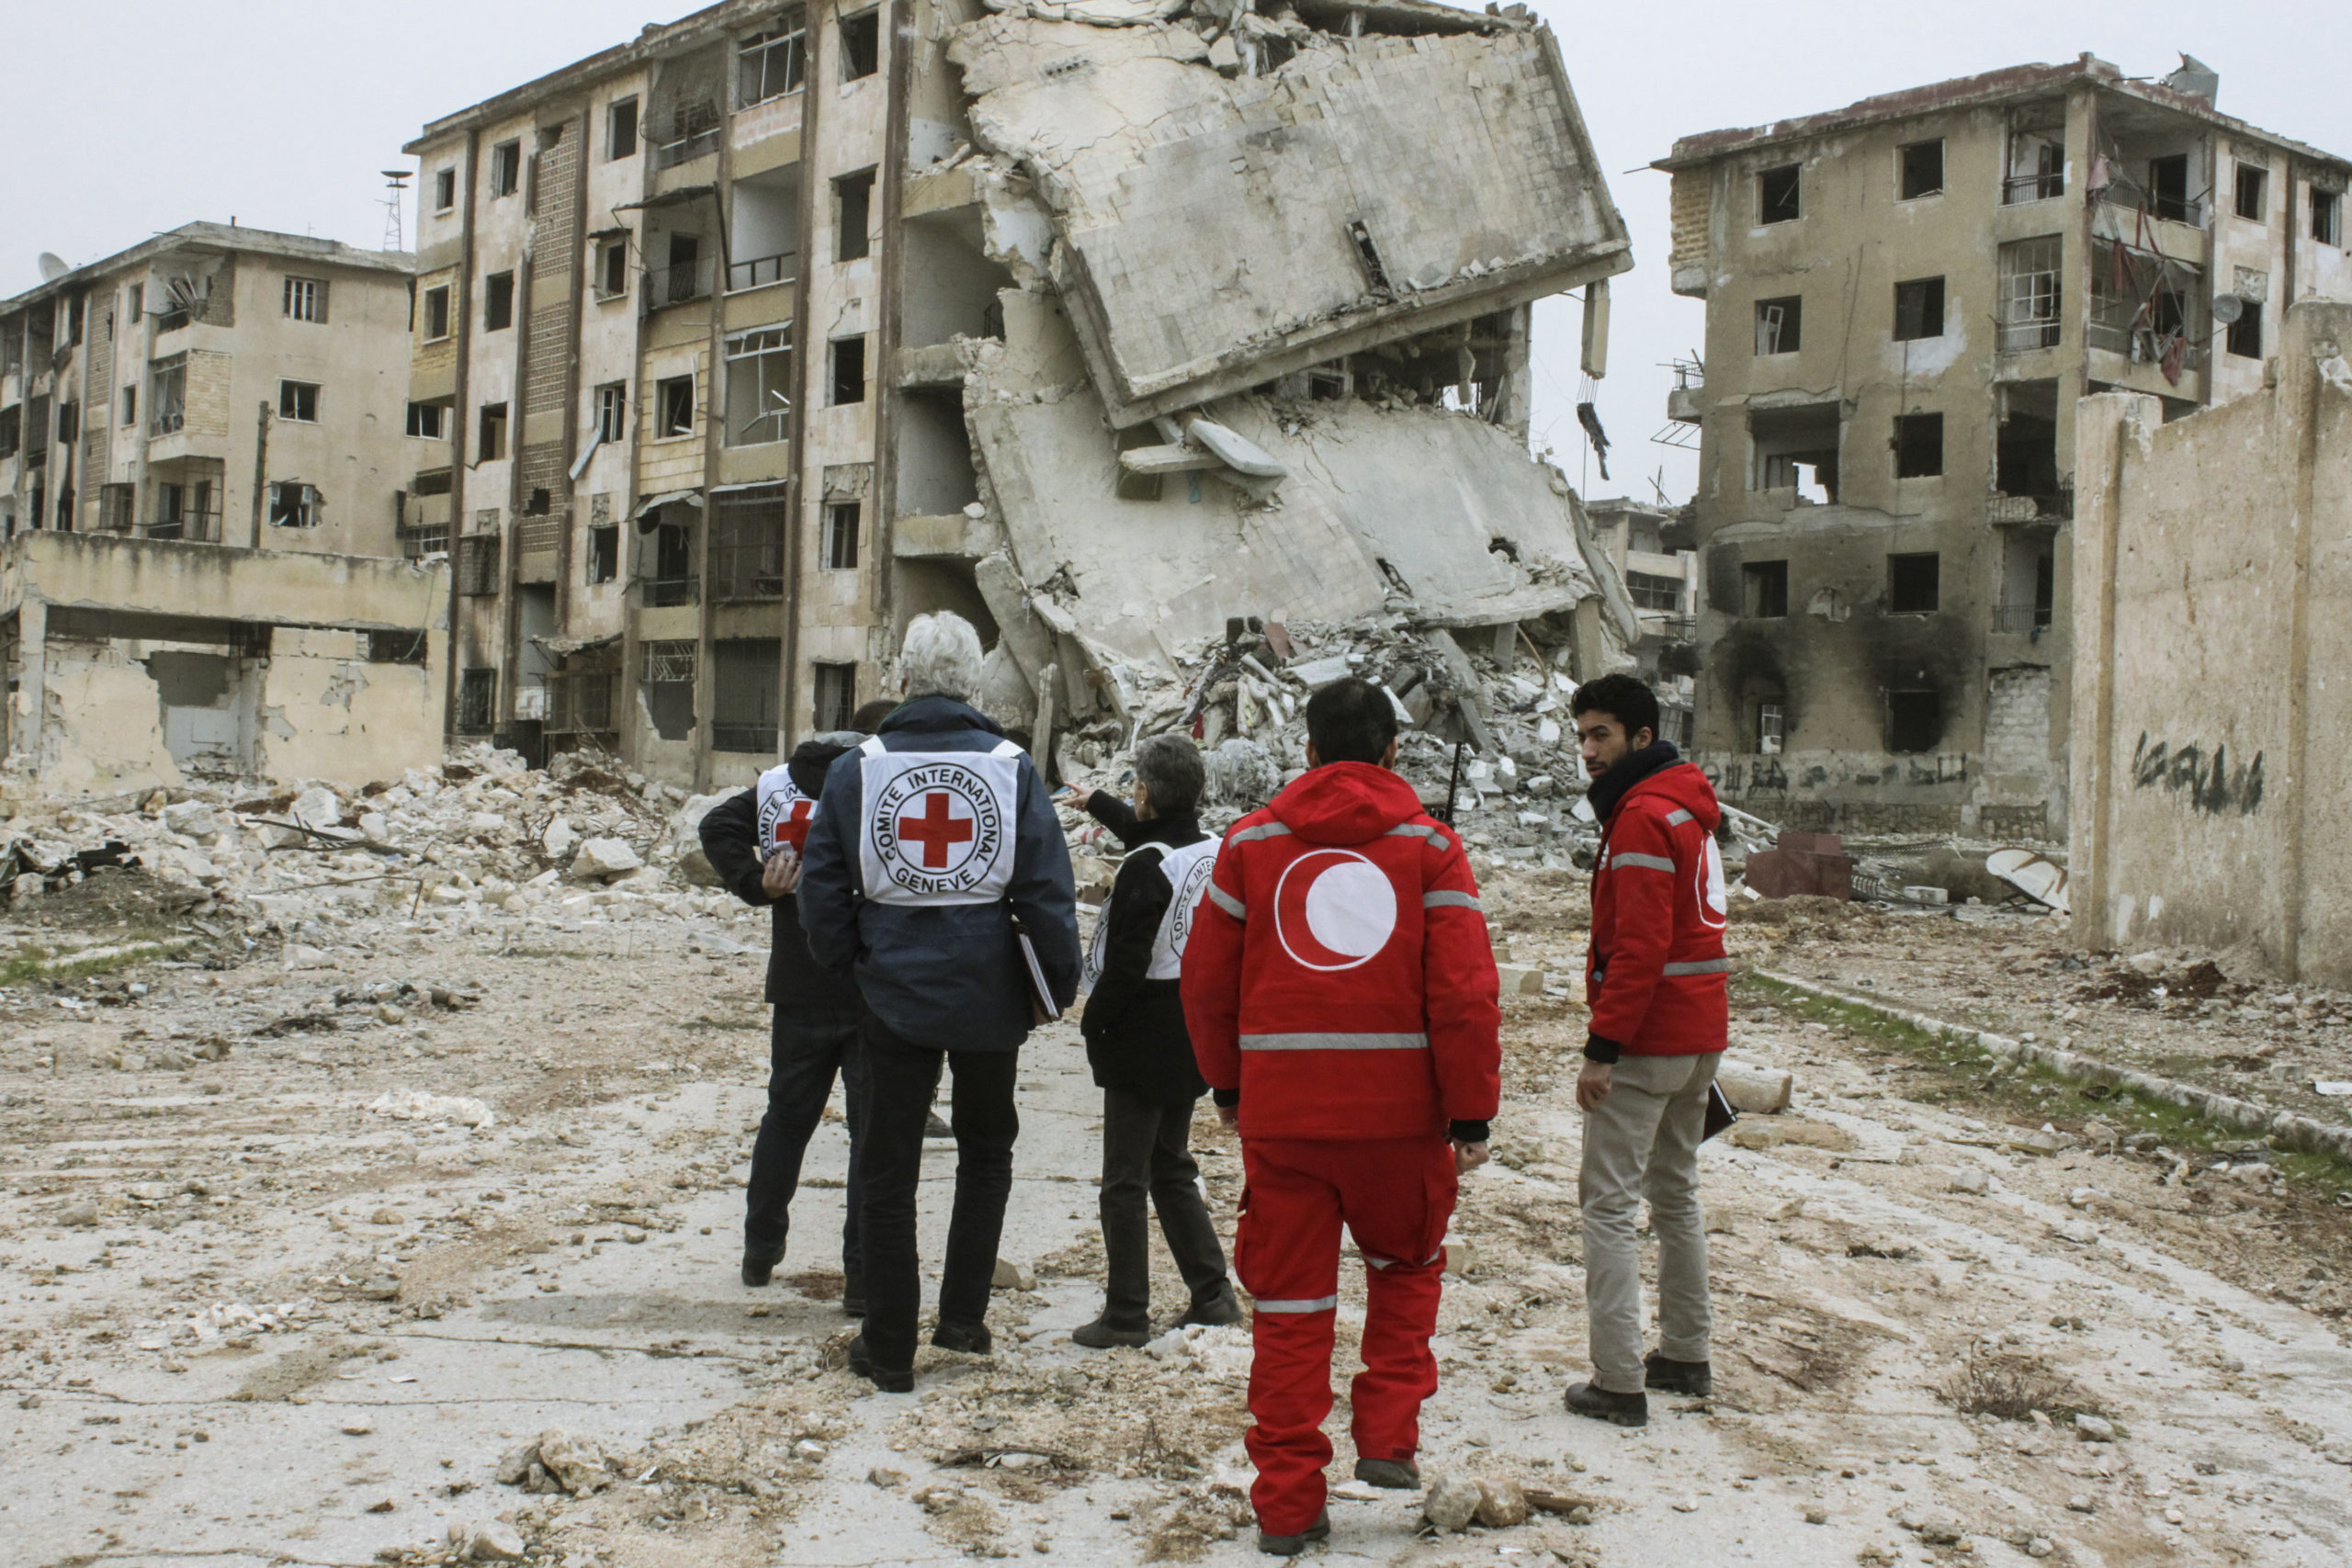 ICRC and Red Crescent personnel are walking towards a destroyed building in Aleppo, Syria.